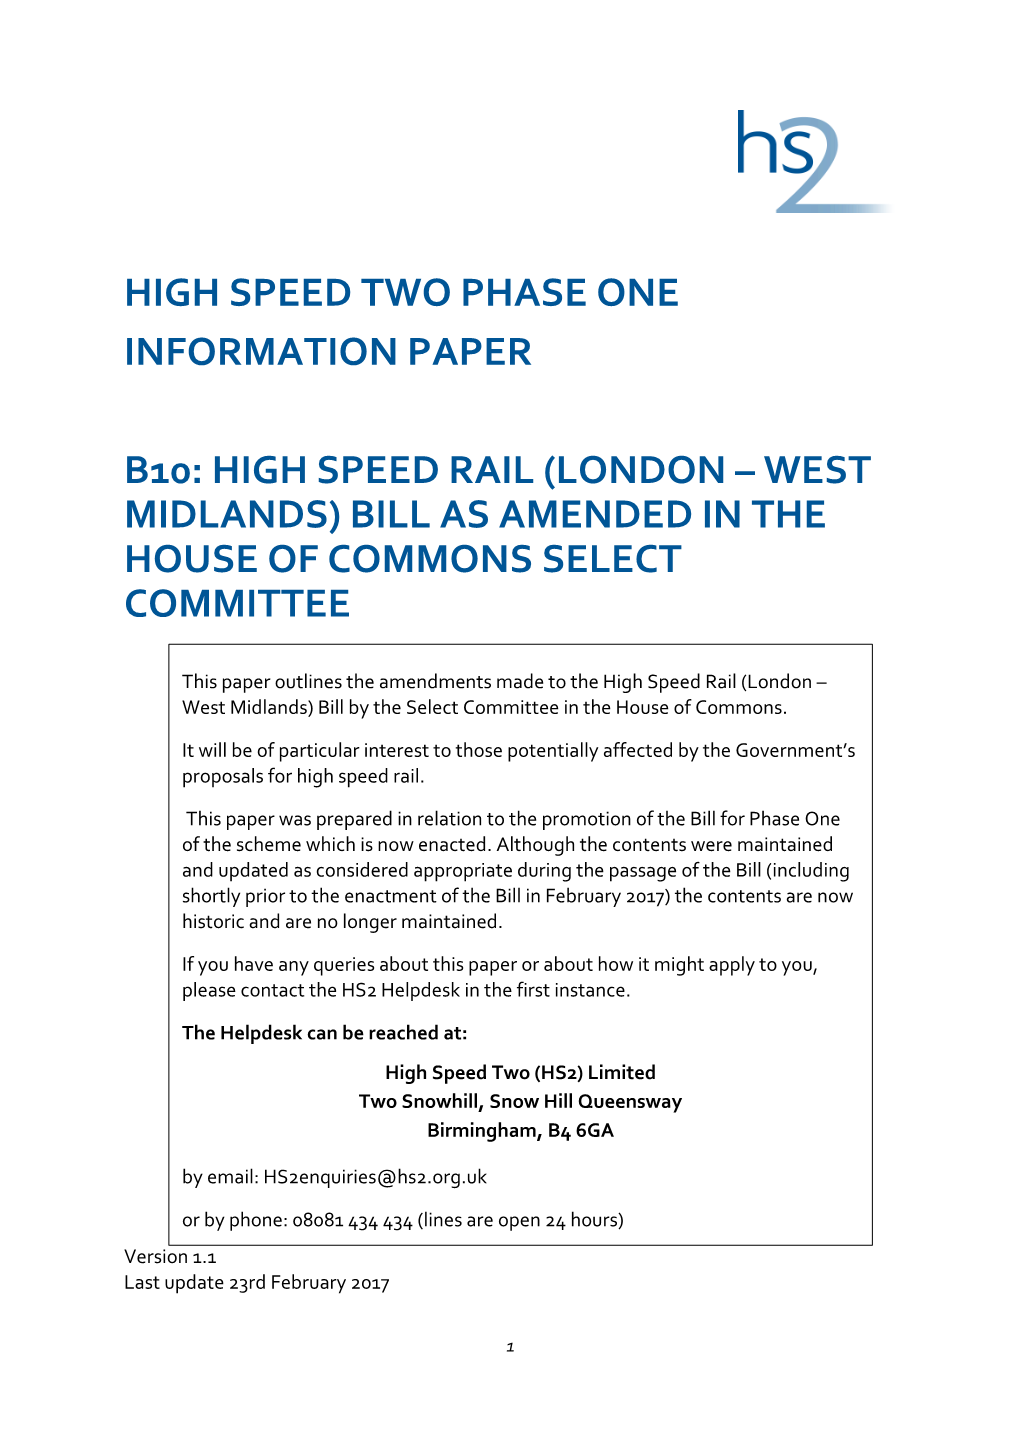 High Speed Rail (London – West Midlands) Bill As Amended in the House of Commons Select Committee